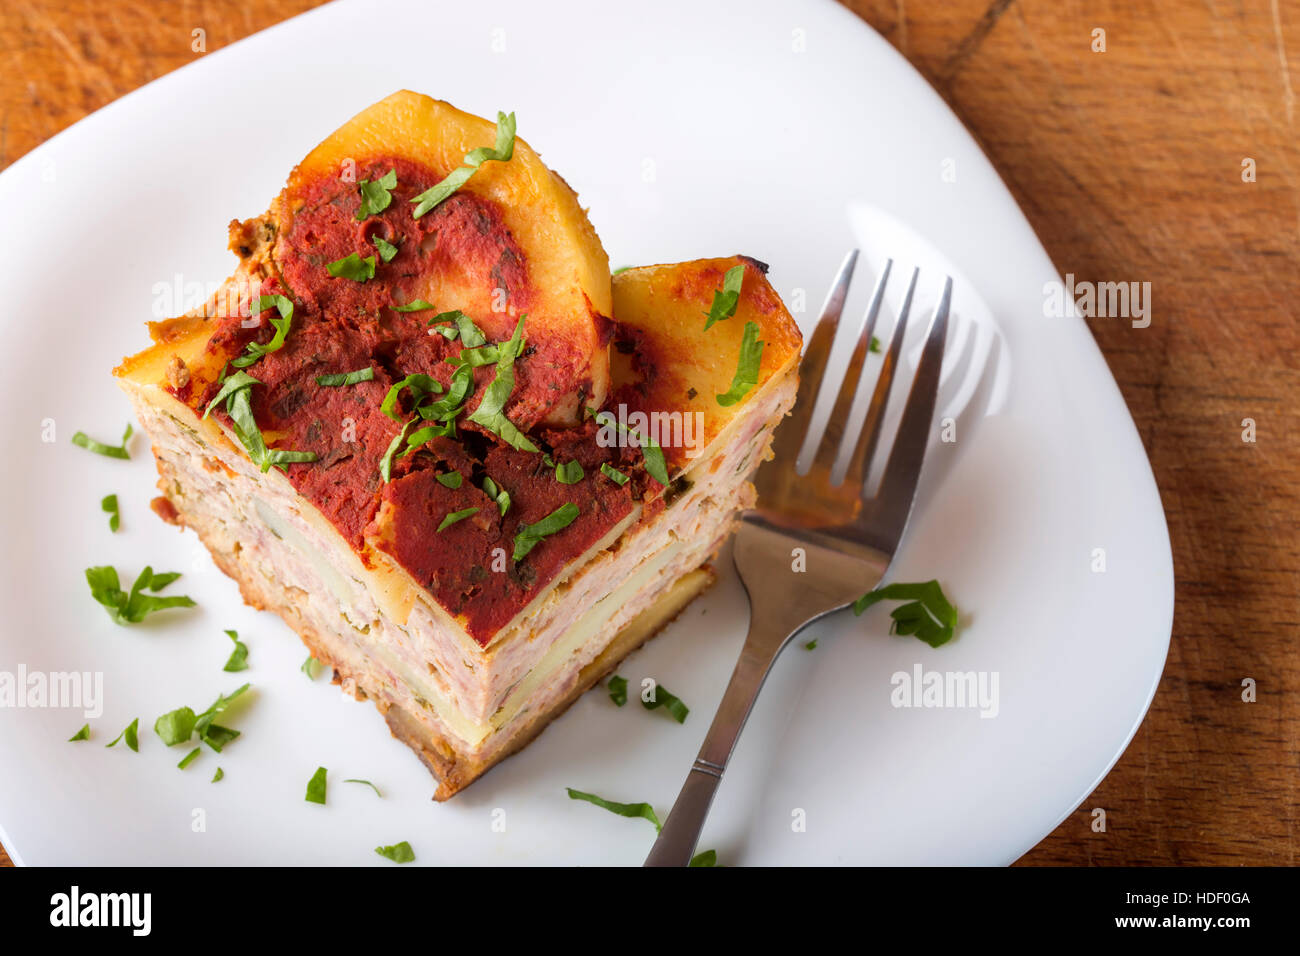 Portion of delicious layered moussaka made with meat and potatoes, on plate with fork and parsley Stock Photo